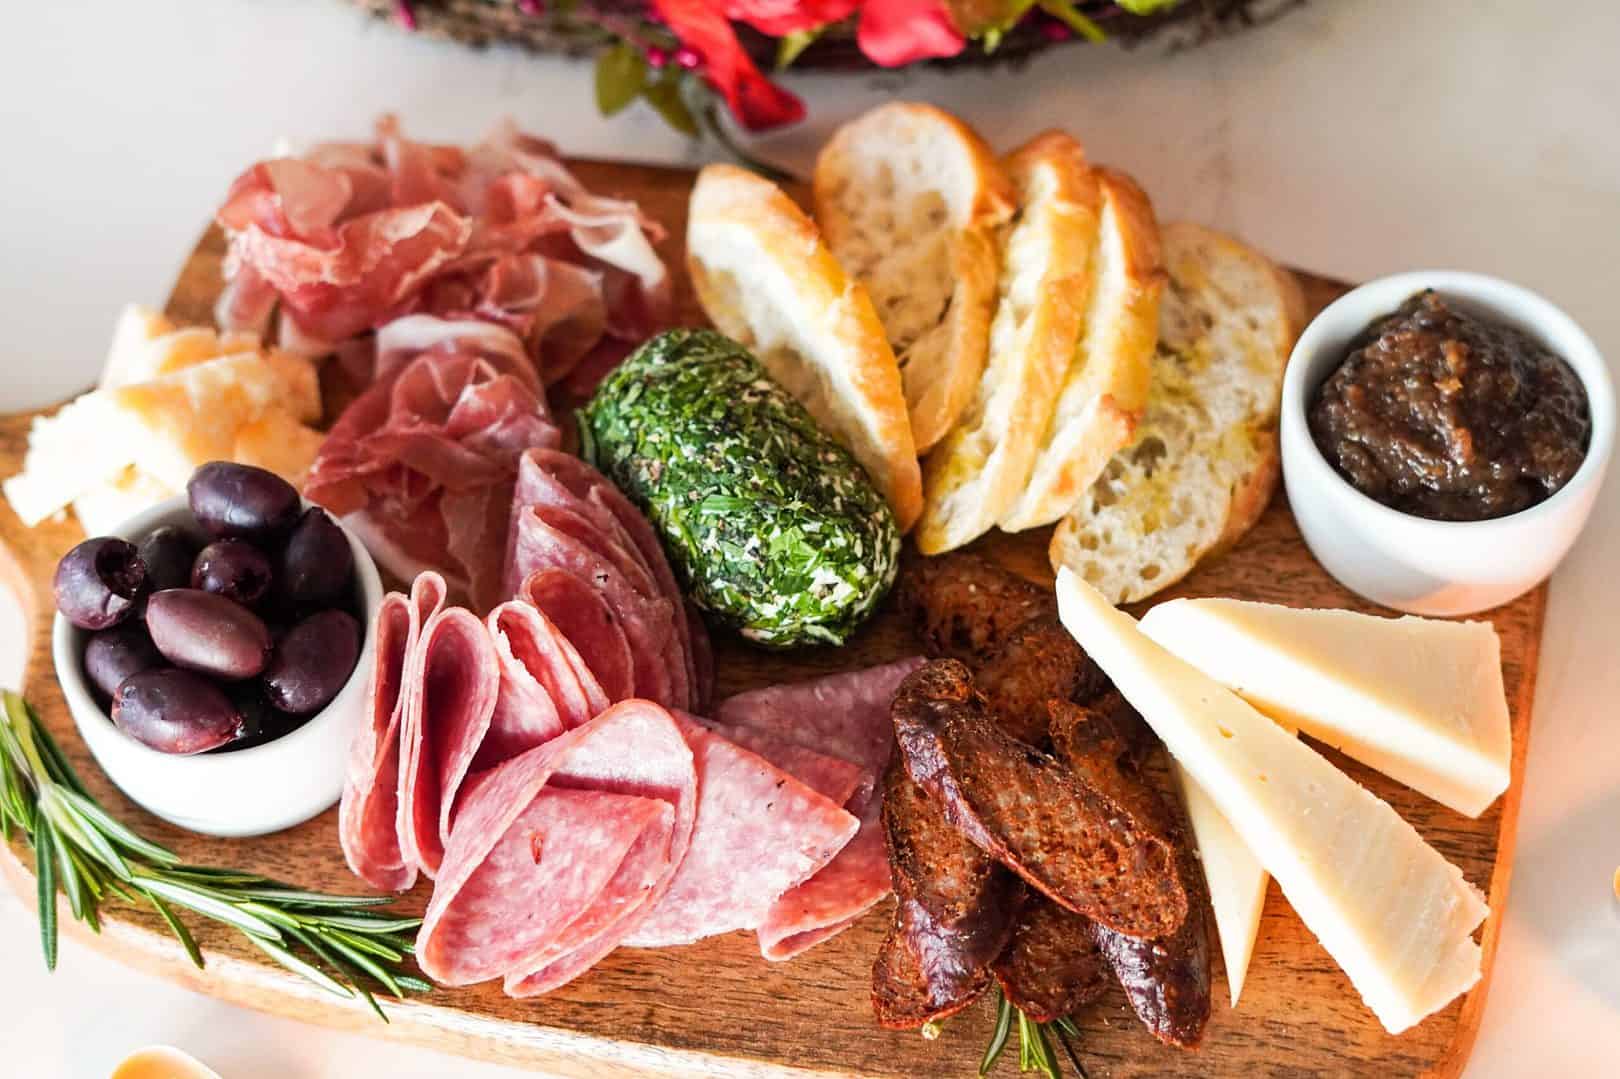 charcuterie board with cheeses, meats, olives, dips and bread